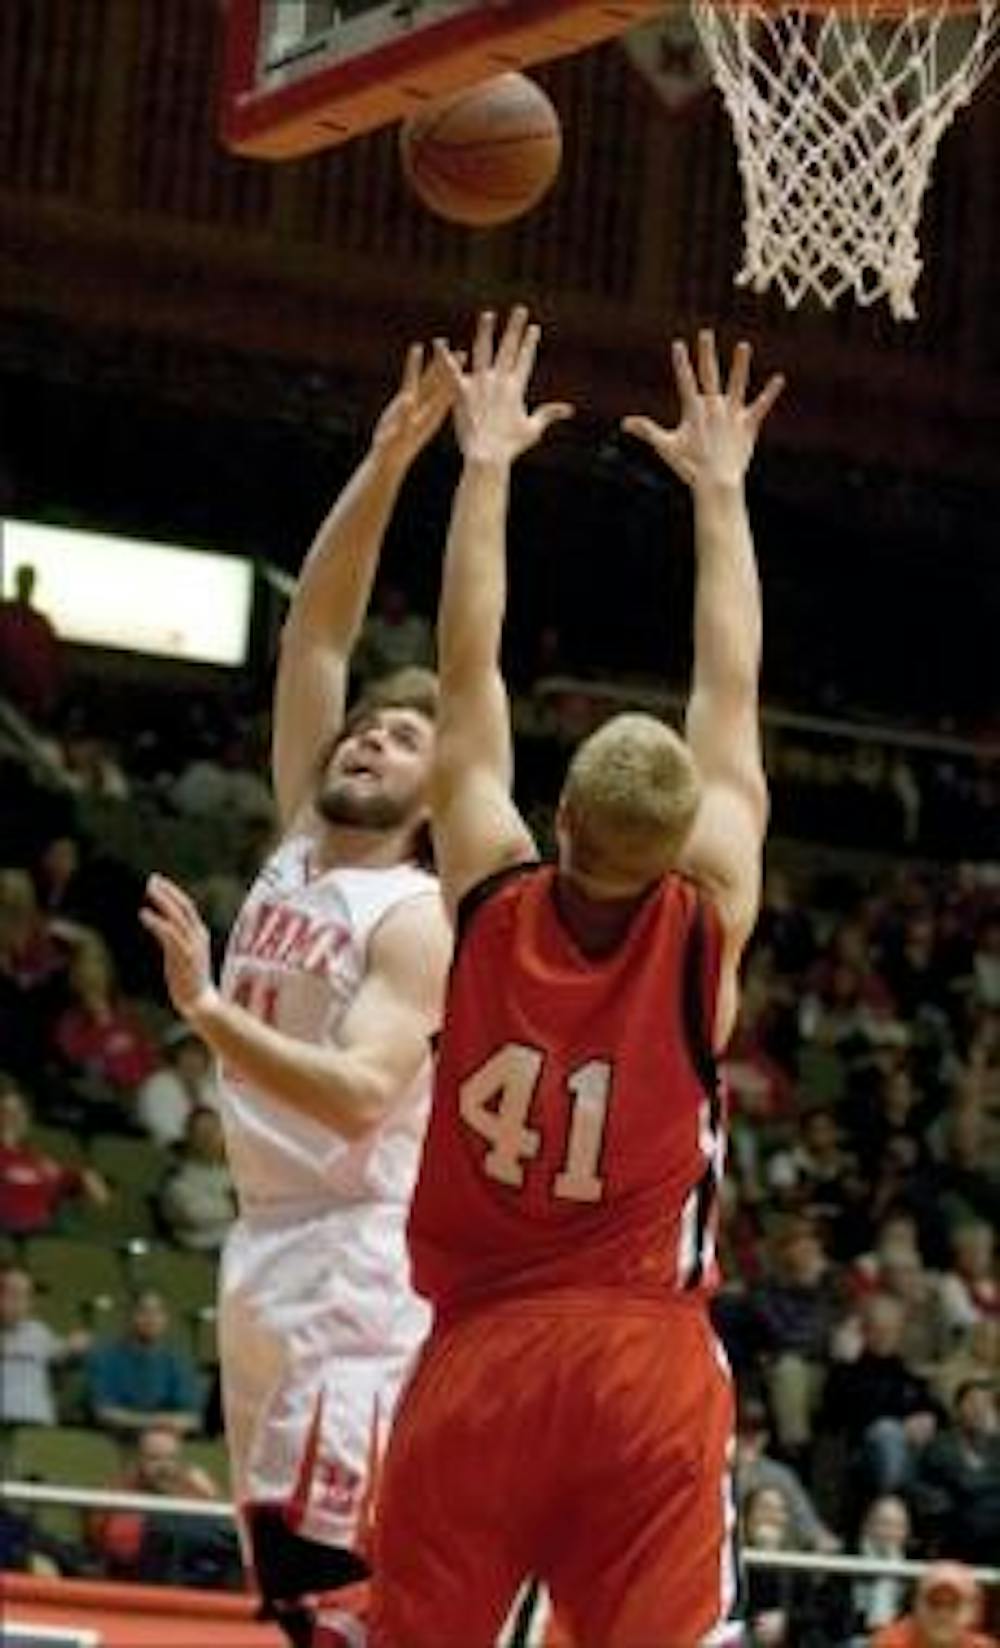 Adam Fletcher and the RedHawks are looking up after rattling off four wins in a row.